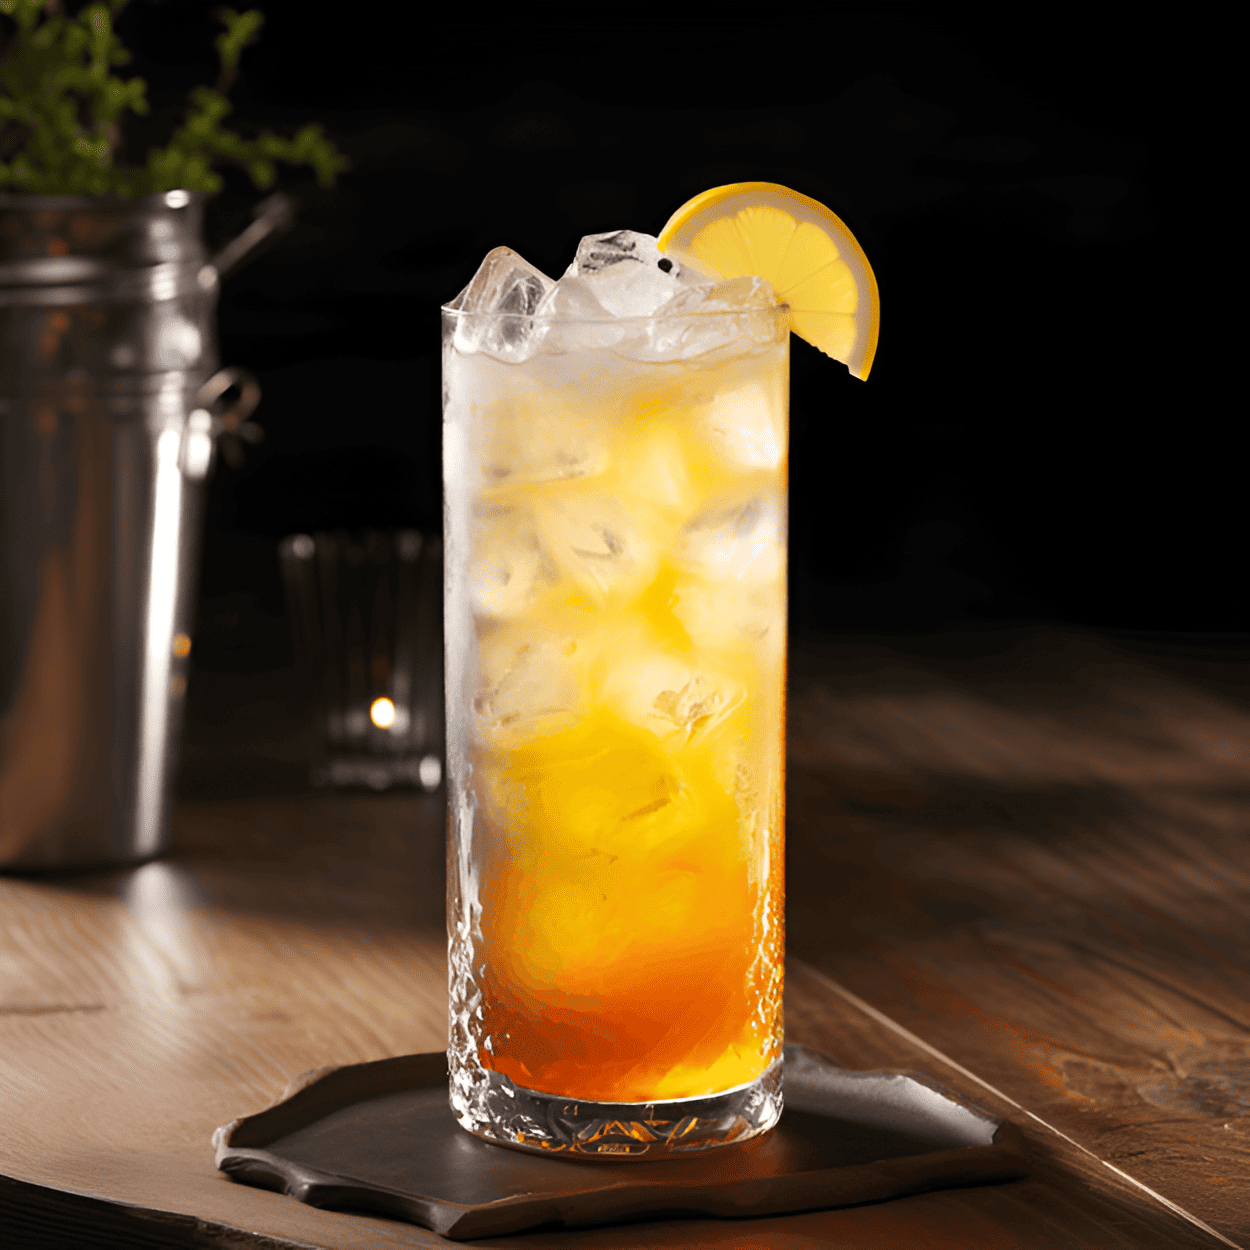 Call A Cab Cocktail Recipe - The Call A Cab cocktail is a potent mix of sweet and sour flavors. The sweetness of the peach schnapps and the sour mix balance each other out, while the vodka and rum give it a strong kick.